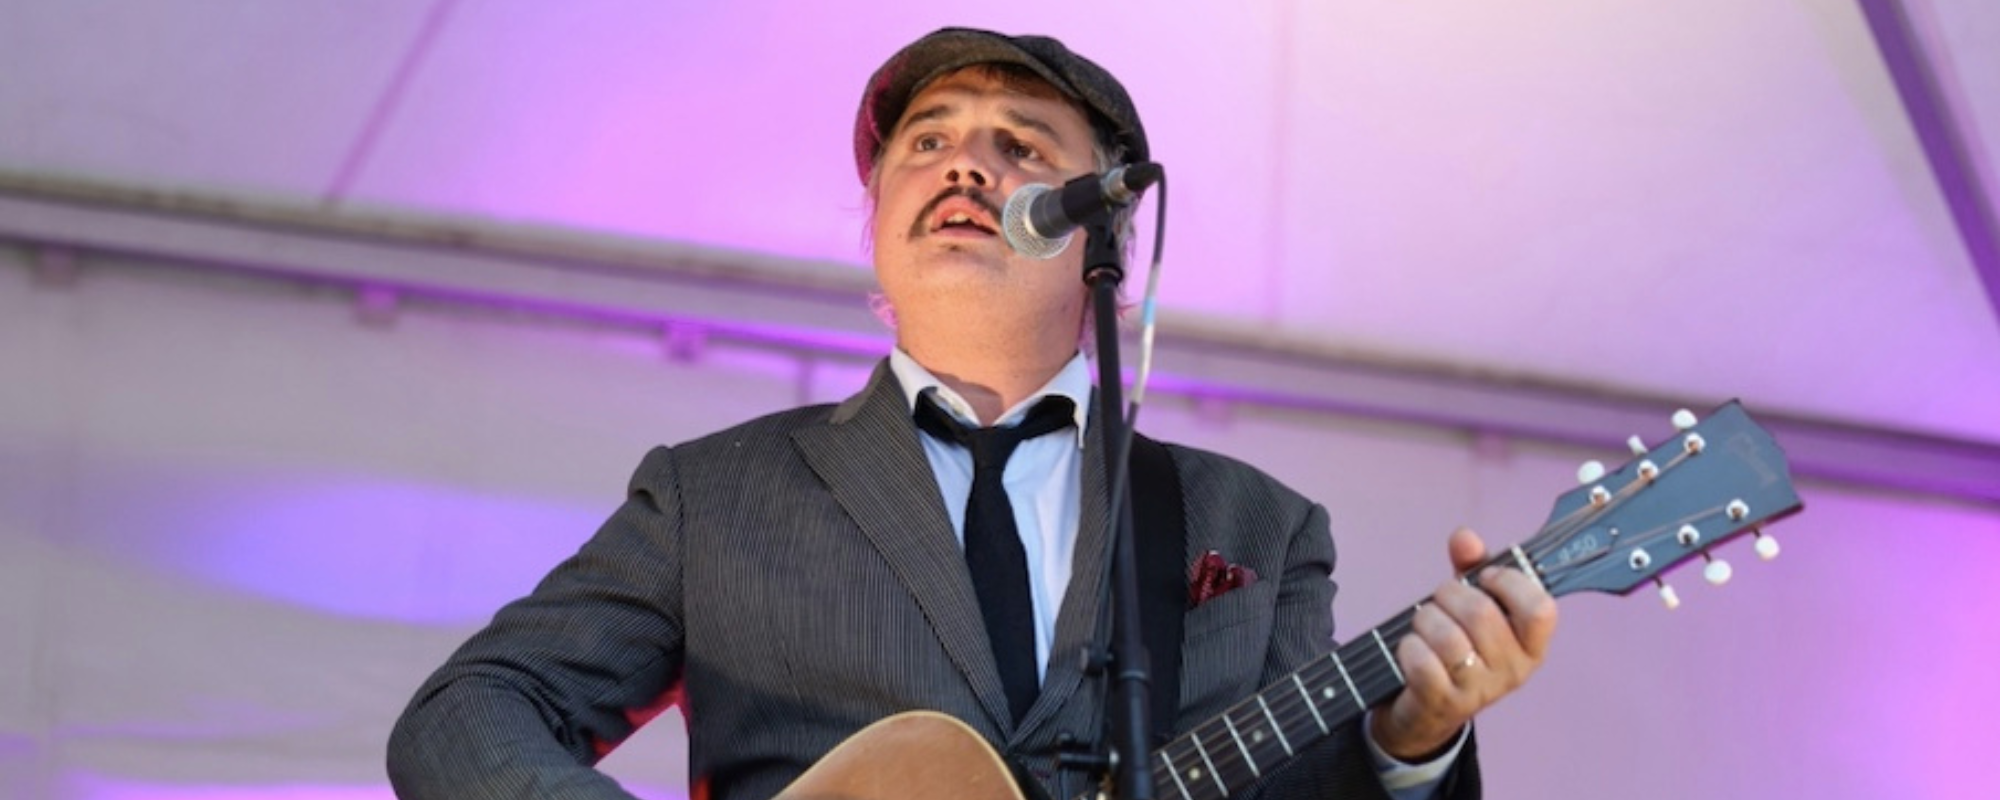 Pete Doherty Addresses His Health in Latest Interview with Louis Theroux: “Death is Lurking”